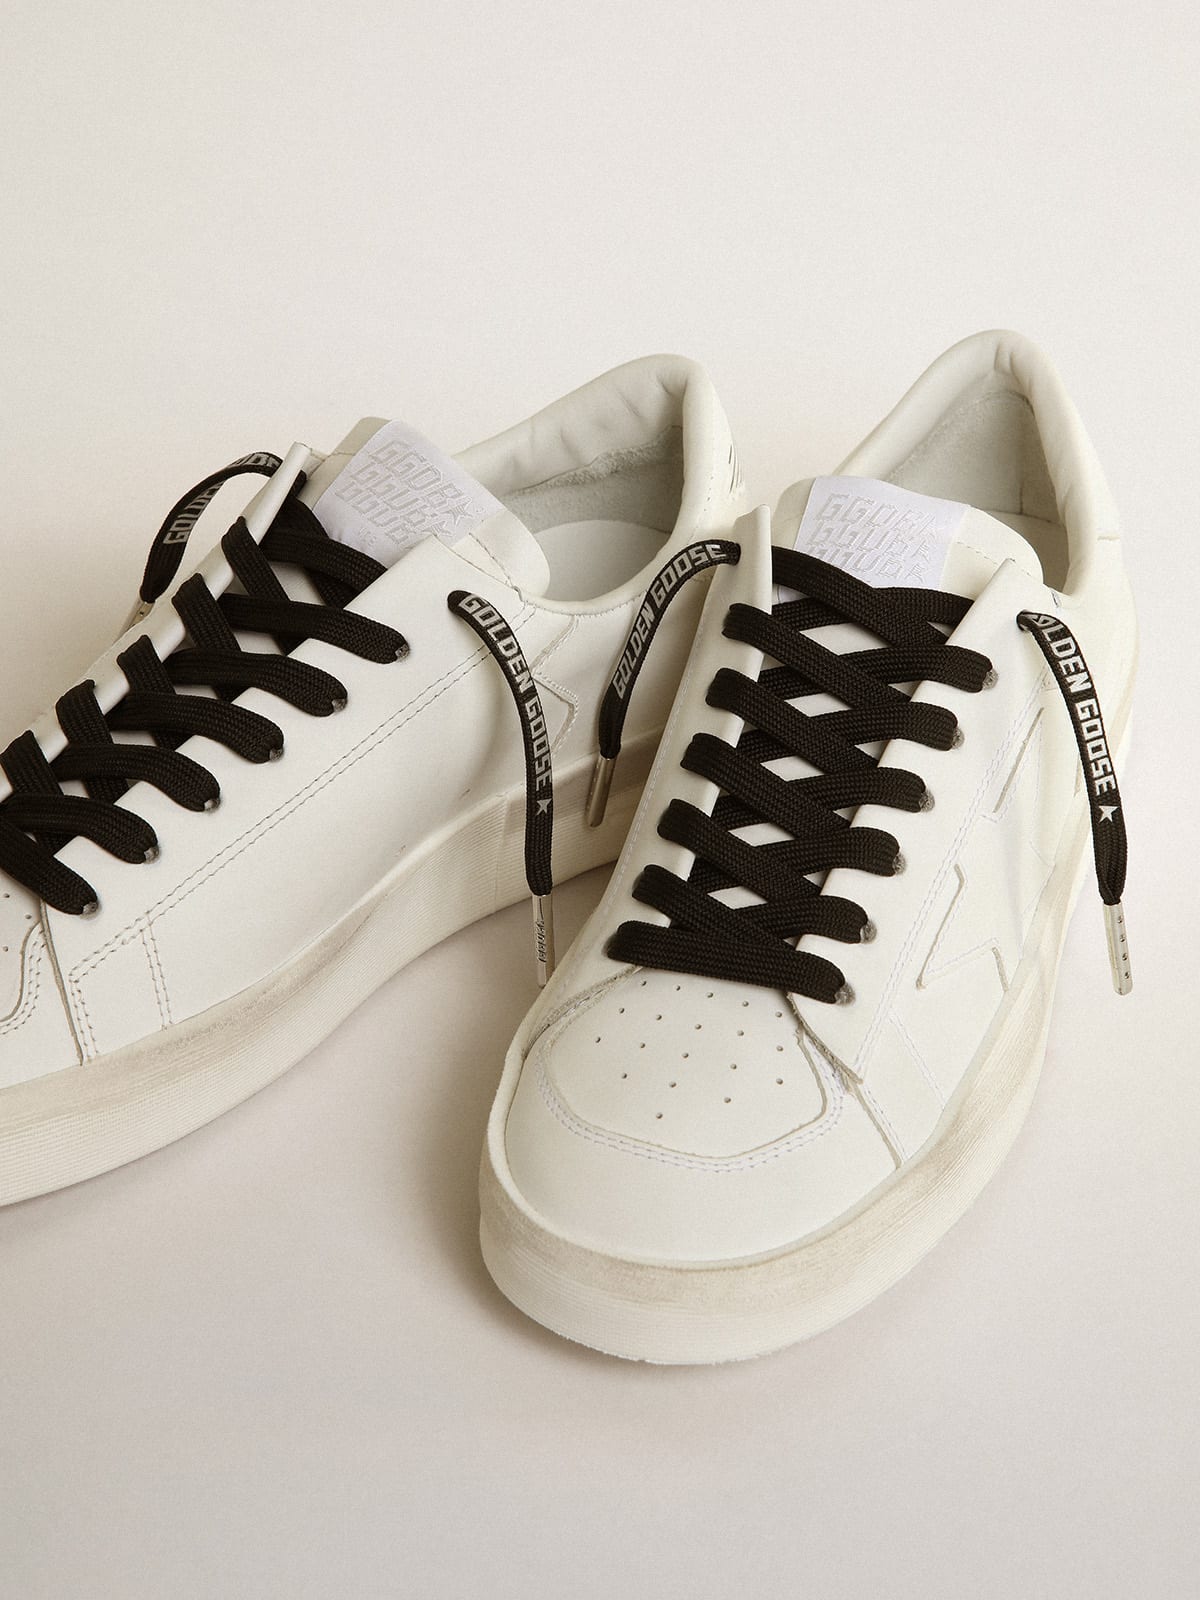 Golden Goose - Black cotton laces with contrasting silver-colored logo in 